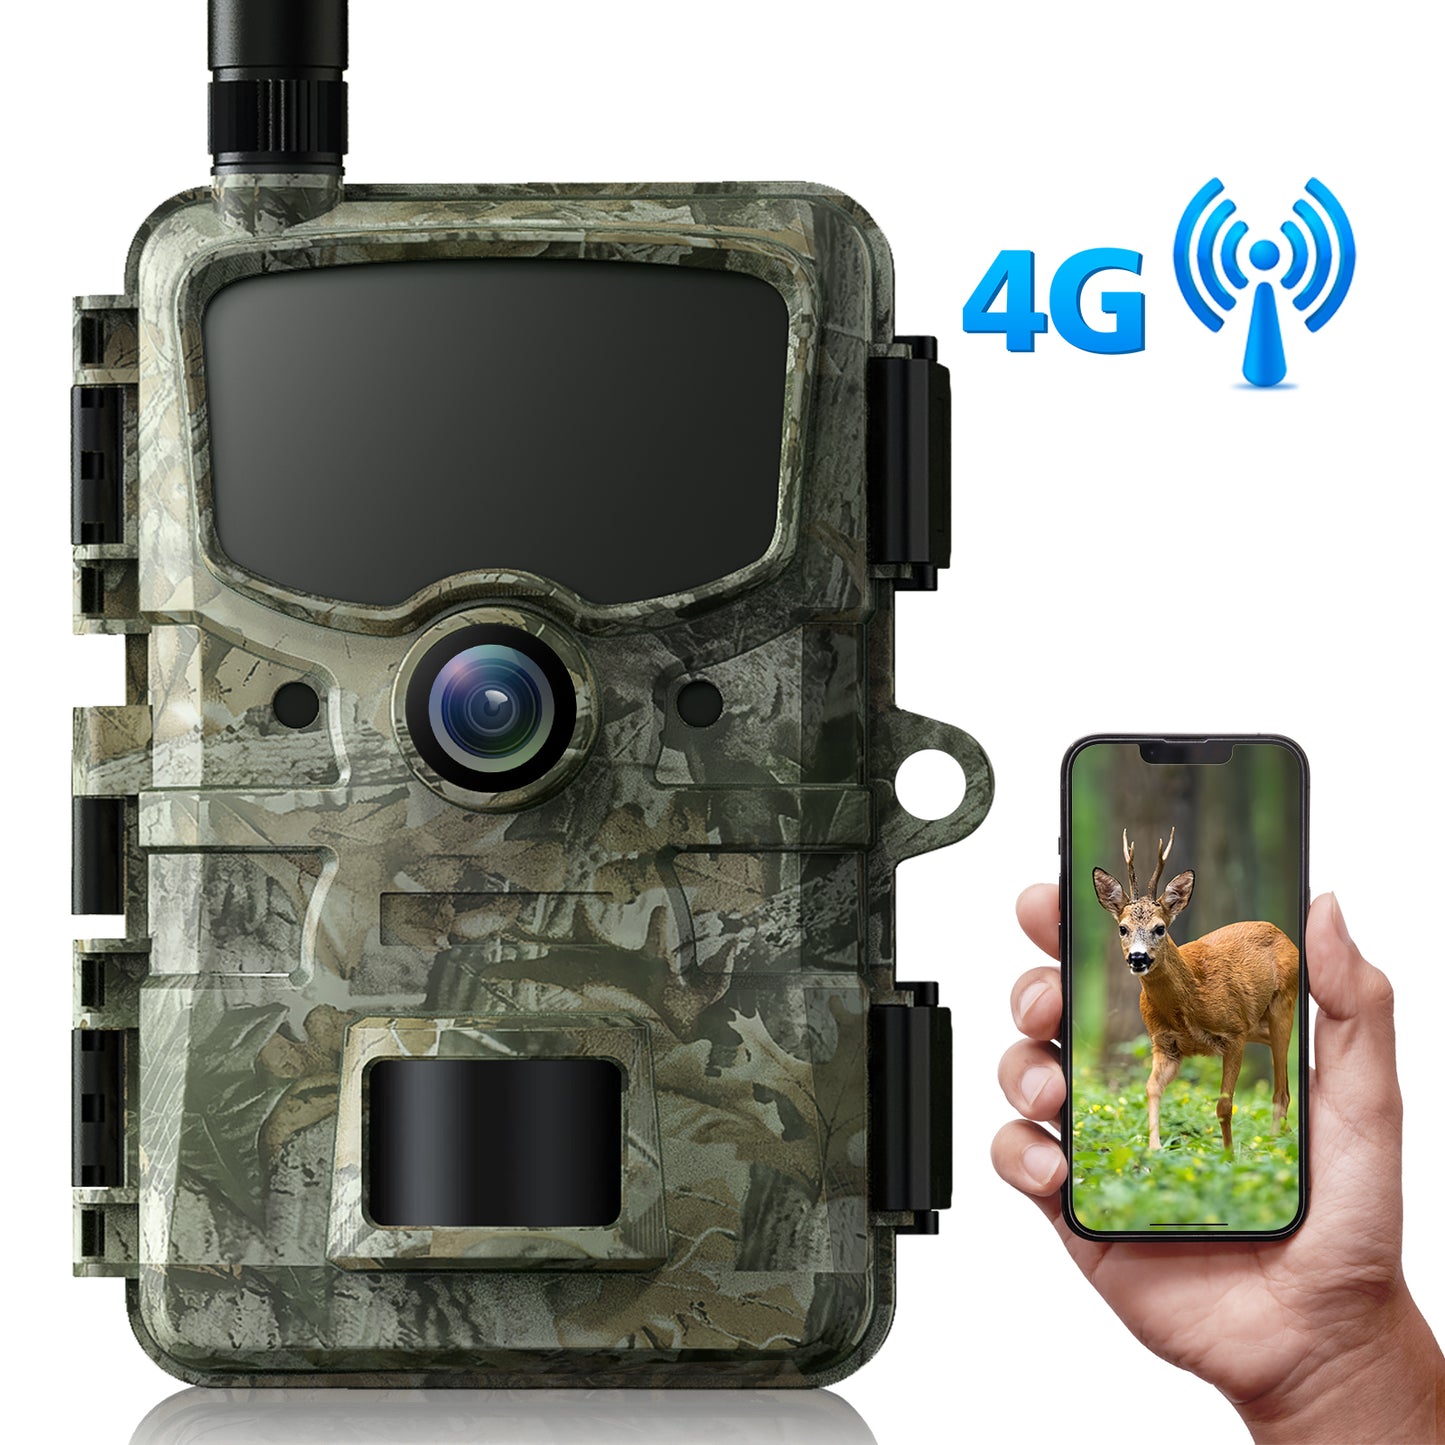 CAMPARK 4G LTE Cellular Trail Camera Sends Picture Video to Cell Phone - Game Camera with SD Card 24MP 1080P Hunting Camera with Night Vision Motion Activated Waterproof IP66 for Wildlife Monitoring